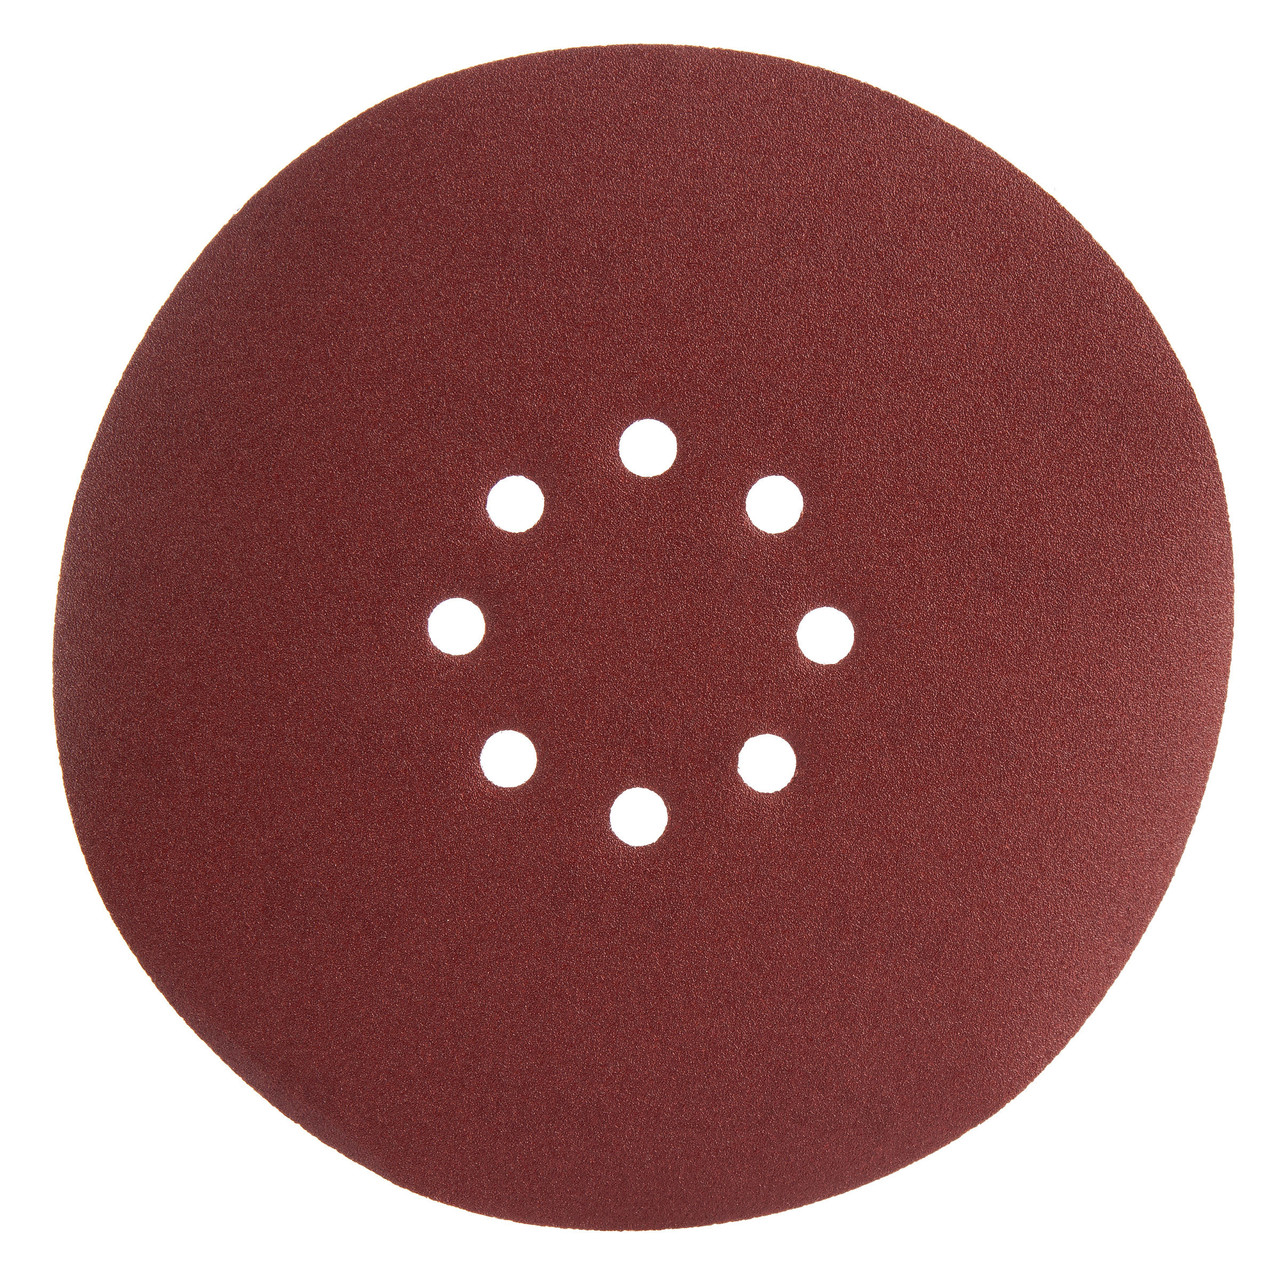 10Pcs 9inch/225mm Sanding Discs 120 Grits 10-Hole Hook and Loop Sanding Discs for Drywall Sander 